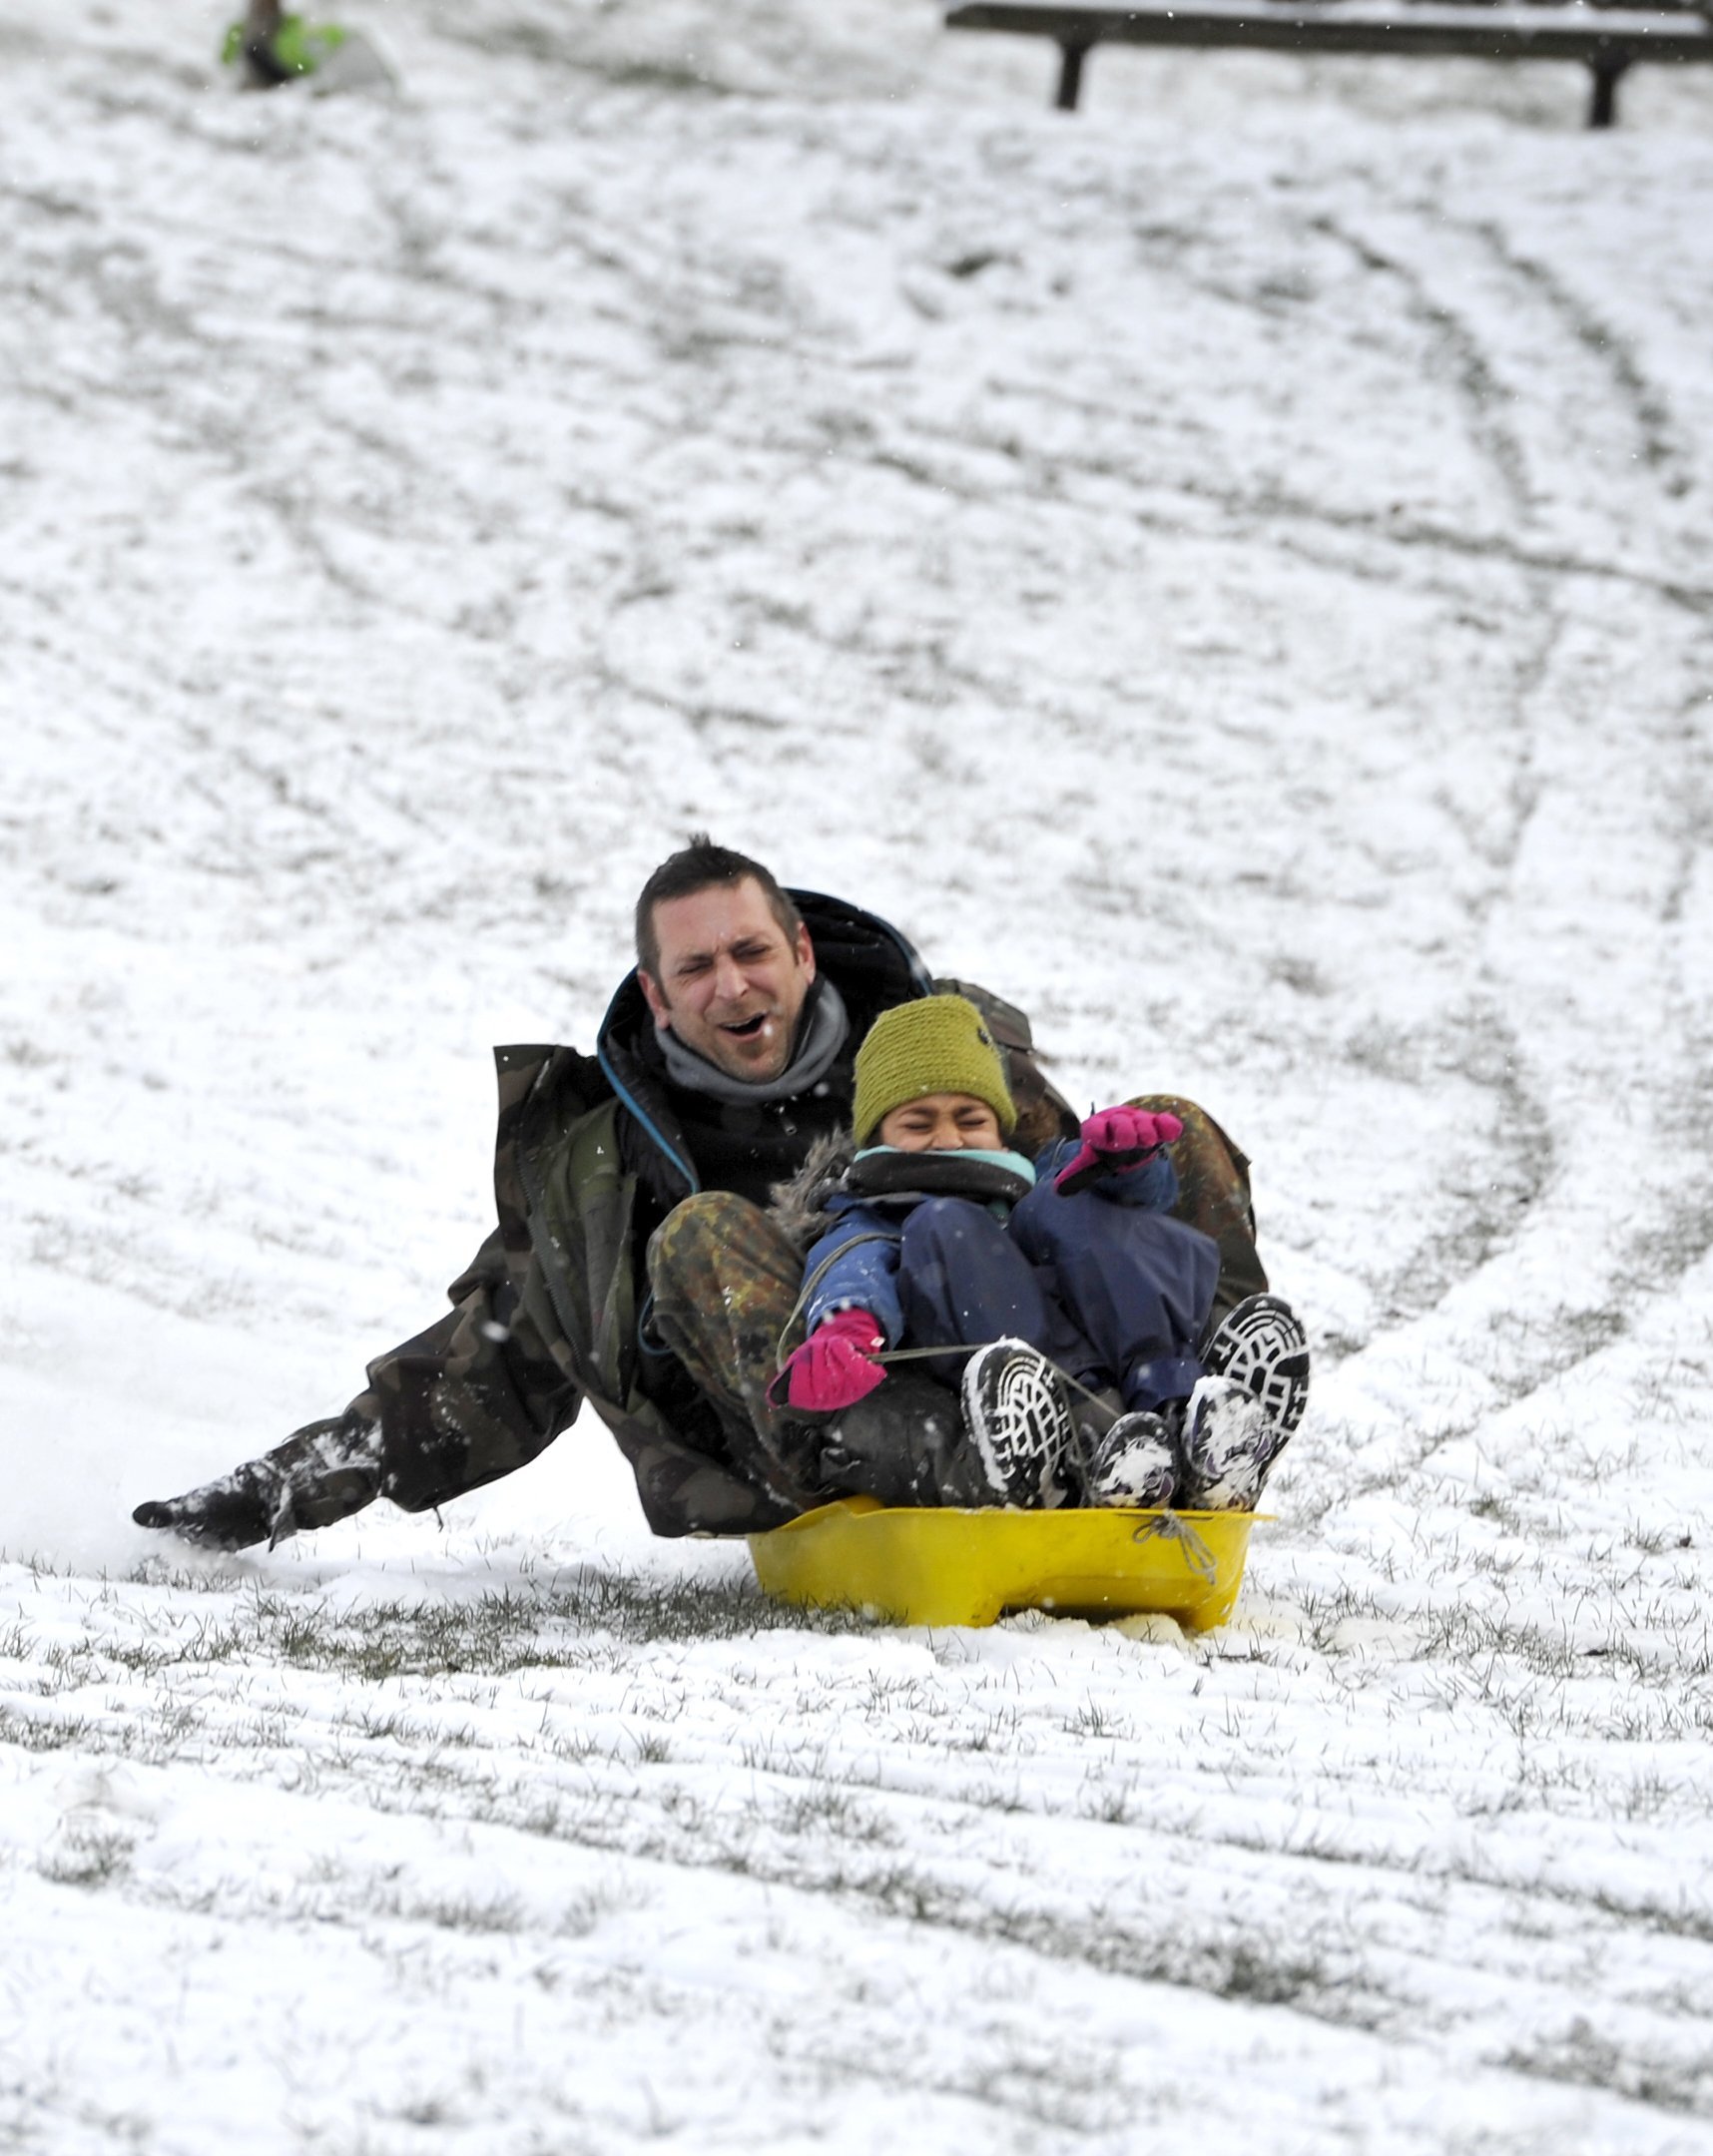 Brighton UK 27th February 2018 - Sledging fun in Queens Park Brighton early this morning as the Beast of the East snow storms spread across Britain today with more snow and freezing weather forecast for the rest of the week.Photograph taken by Simon 